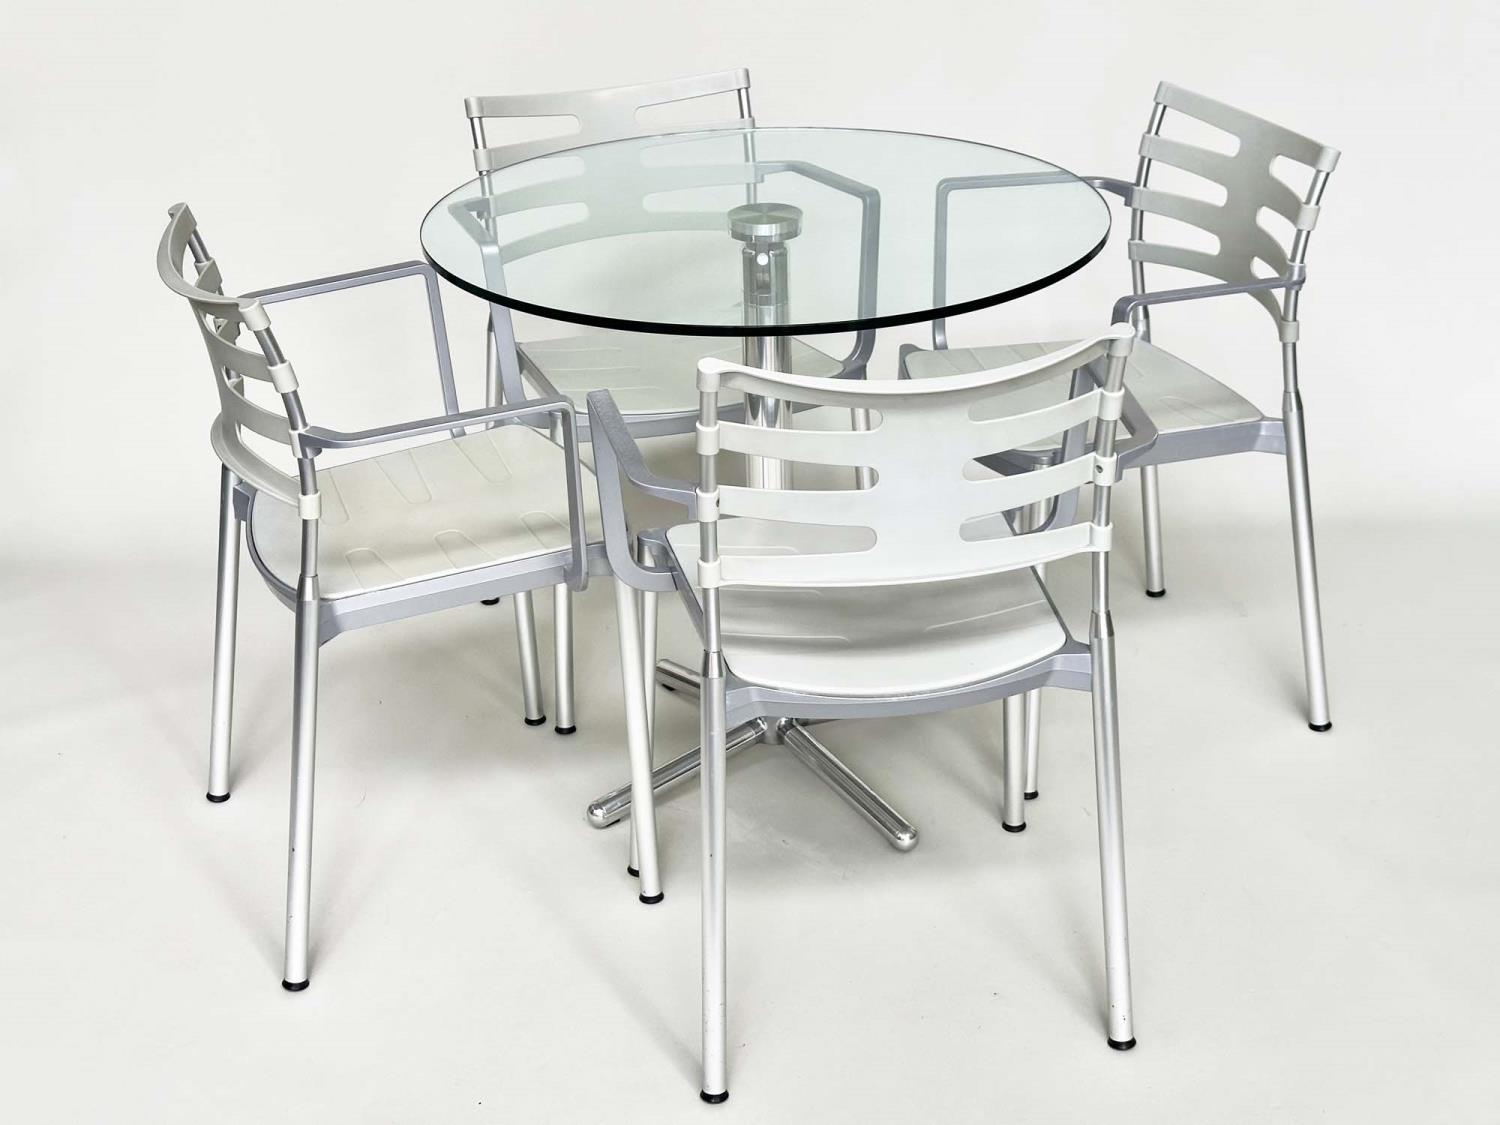 FRITZ HANSEN ICE DINING CHAIRS, a set of four, by Kasper Salto, with a chrome and glass tilt